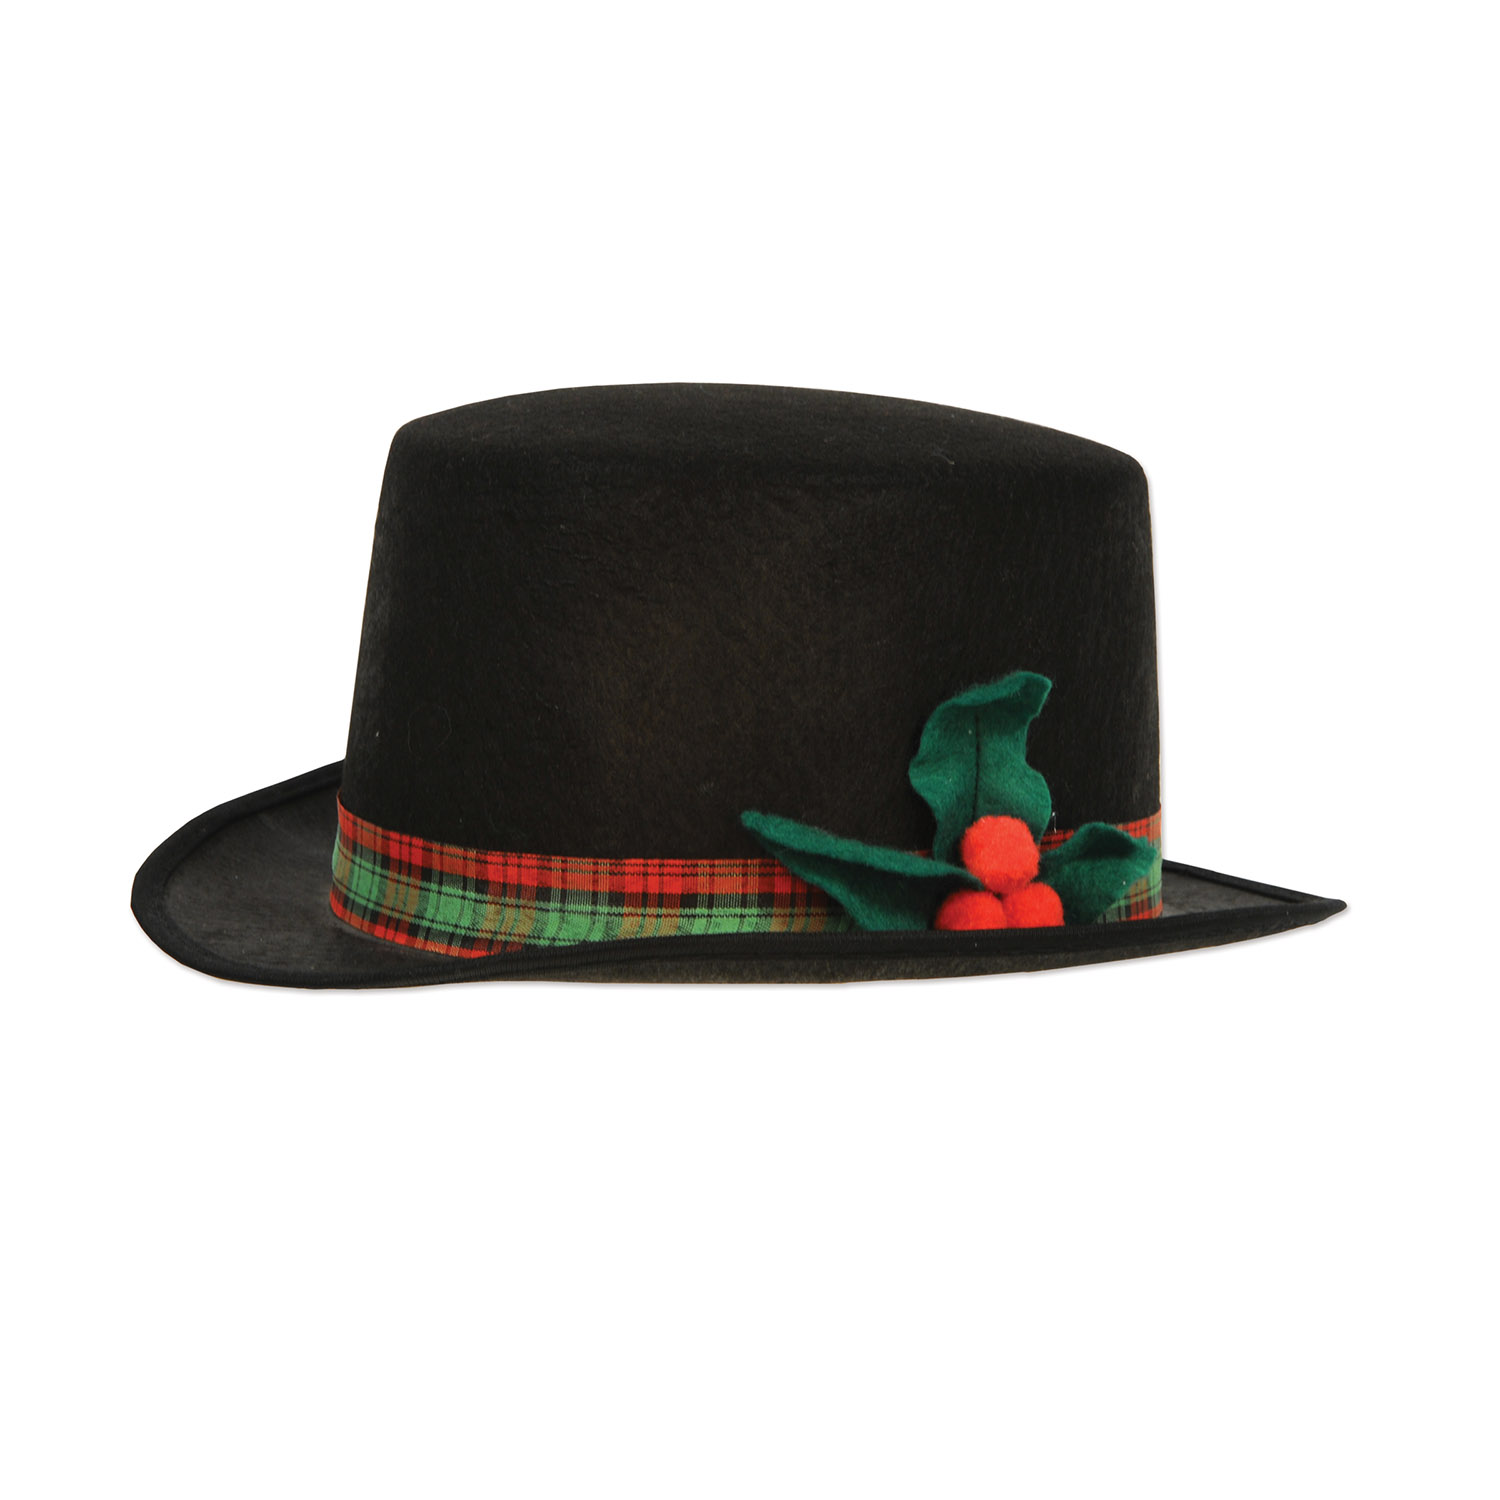 Beistle Pack of 12 Black Felt with Plaid Band and Holly Christmas Caroler Hat